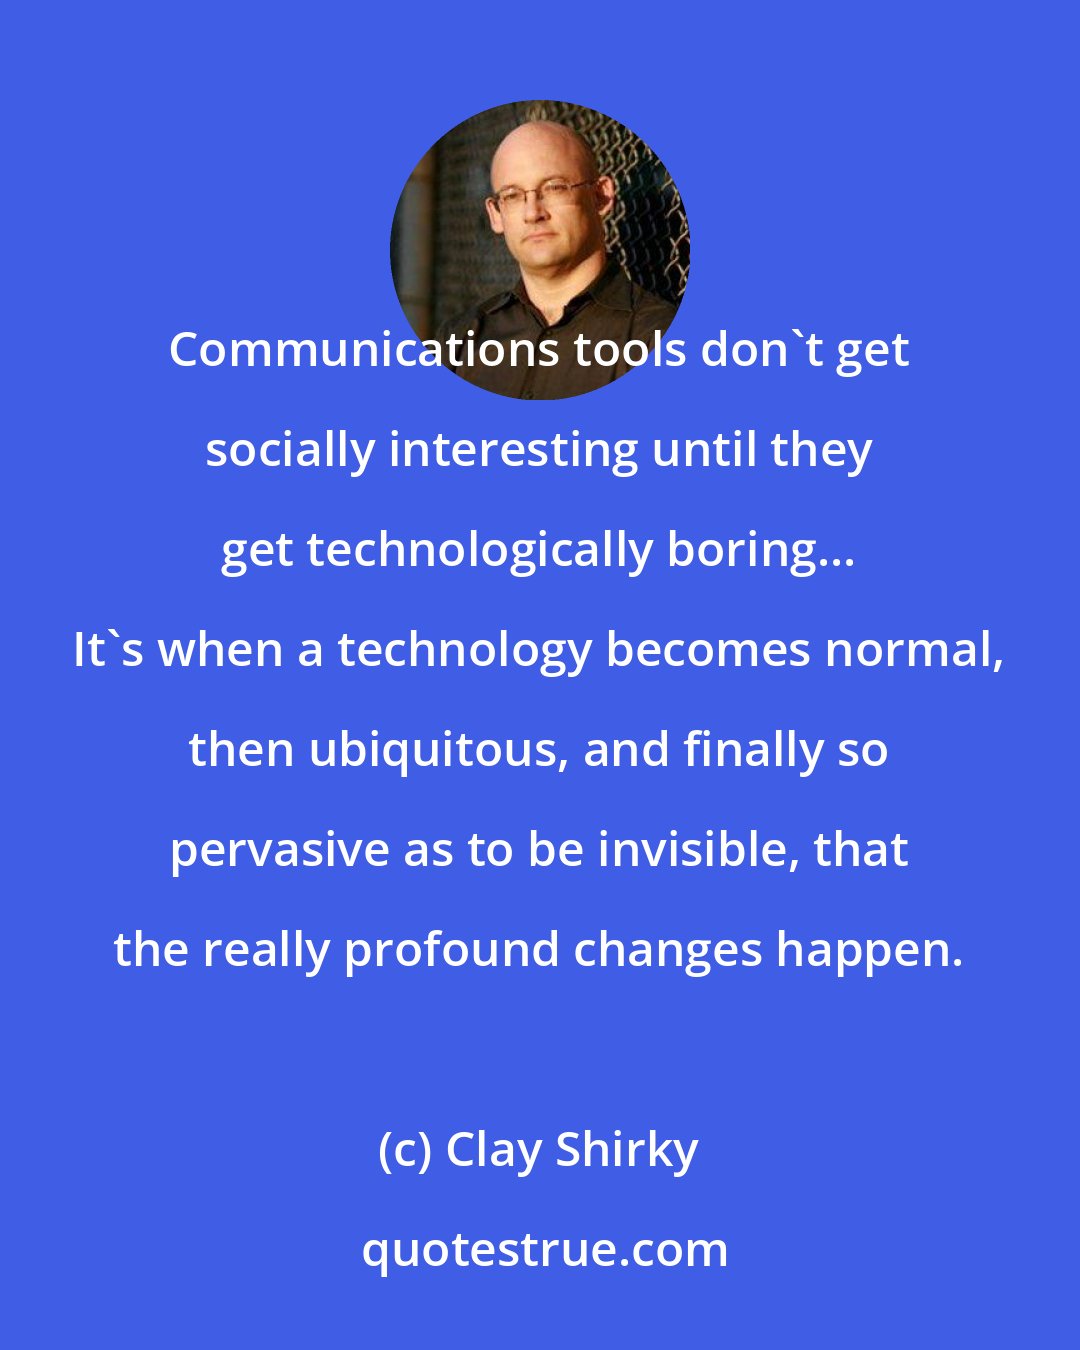 Clay Shirky: Communications tools don't get socially interesting until they get technologically boring... It's when a technology becomes normal, then ubiquitous, and finally so pervasive as to be invisible, that the really profound changes happen.